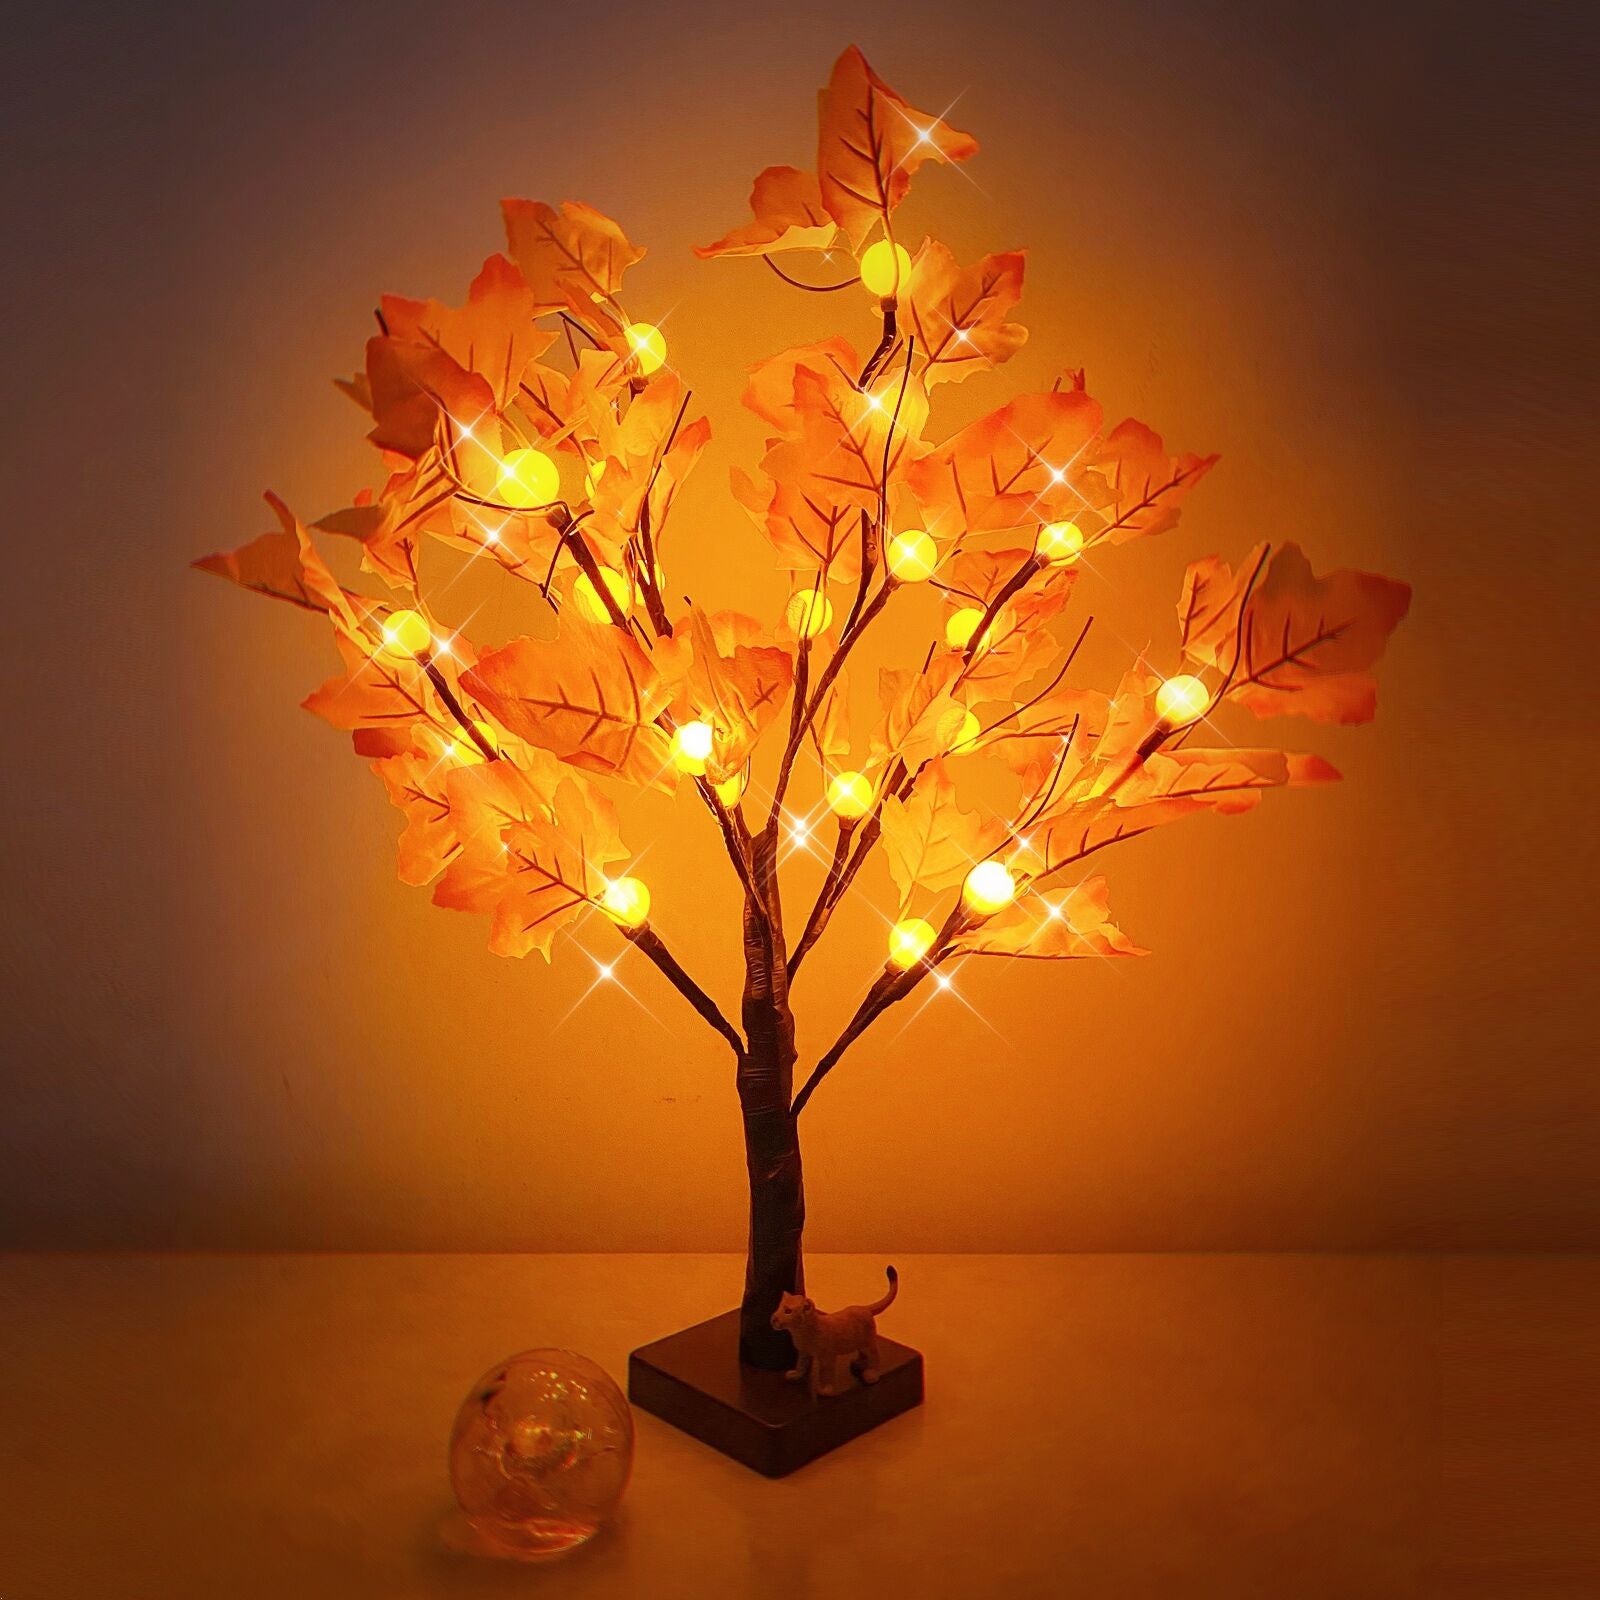 Artificial Fall Lighted Maple Tree 24 LED Pumpkin Lights Halloween Thanksgiving Decorations Table Lights Battery Operated for Autumn Decoration Wedding Party Gifts Indoor Outdoor Harvest Home Decor